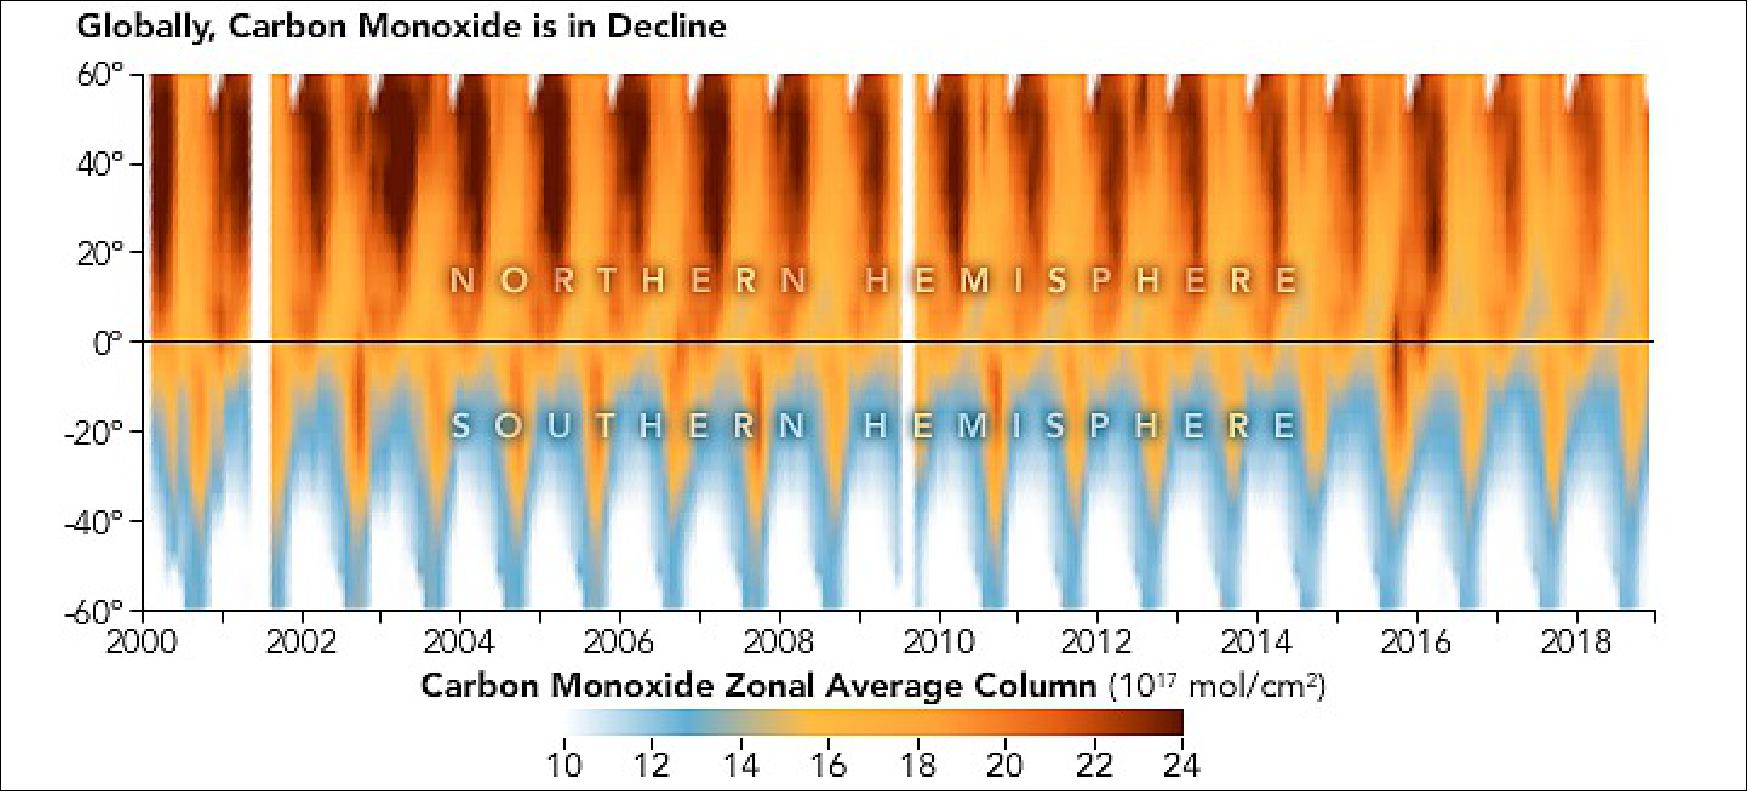 Figure 17: The image highlights the seasonal and geographic variation in atmospheric carbon monoxide as measured by Measurement of Pollution in the Troposphere (MOPITT) between 2000 and 2019 (image credit: NASA Earth Observatory images by Joshua Stevens, using data courtesy of Buchholz, R., et al. (2021). Story by Adam Voiland)